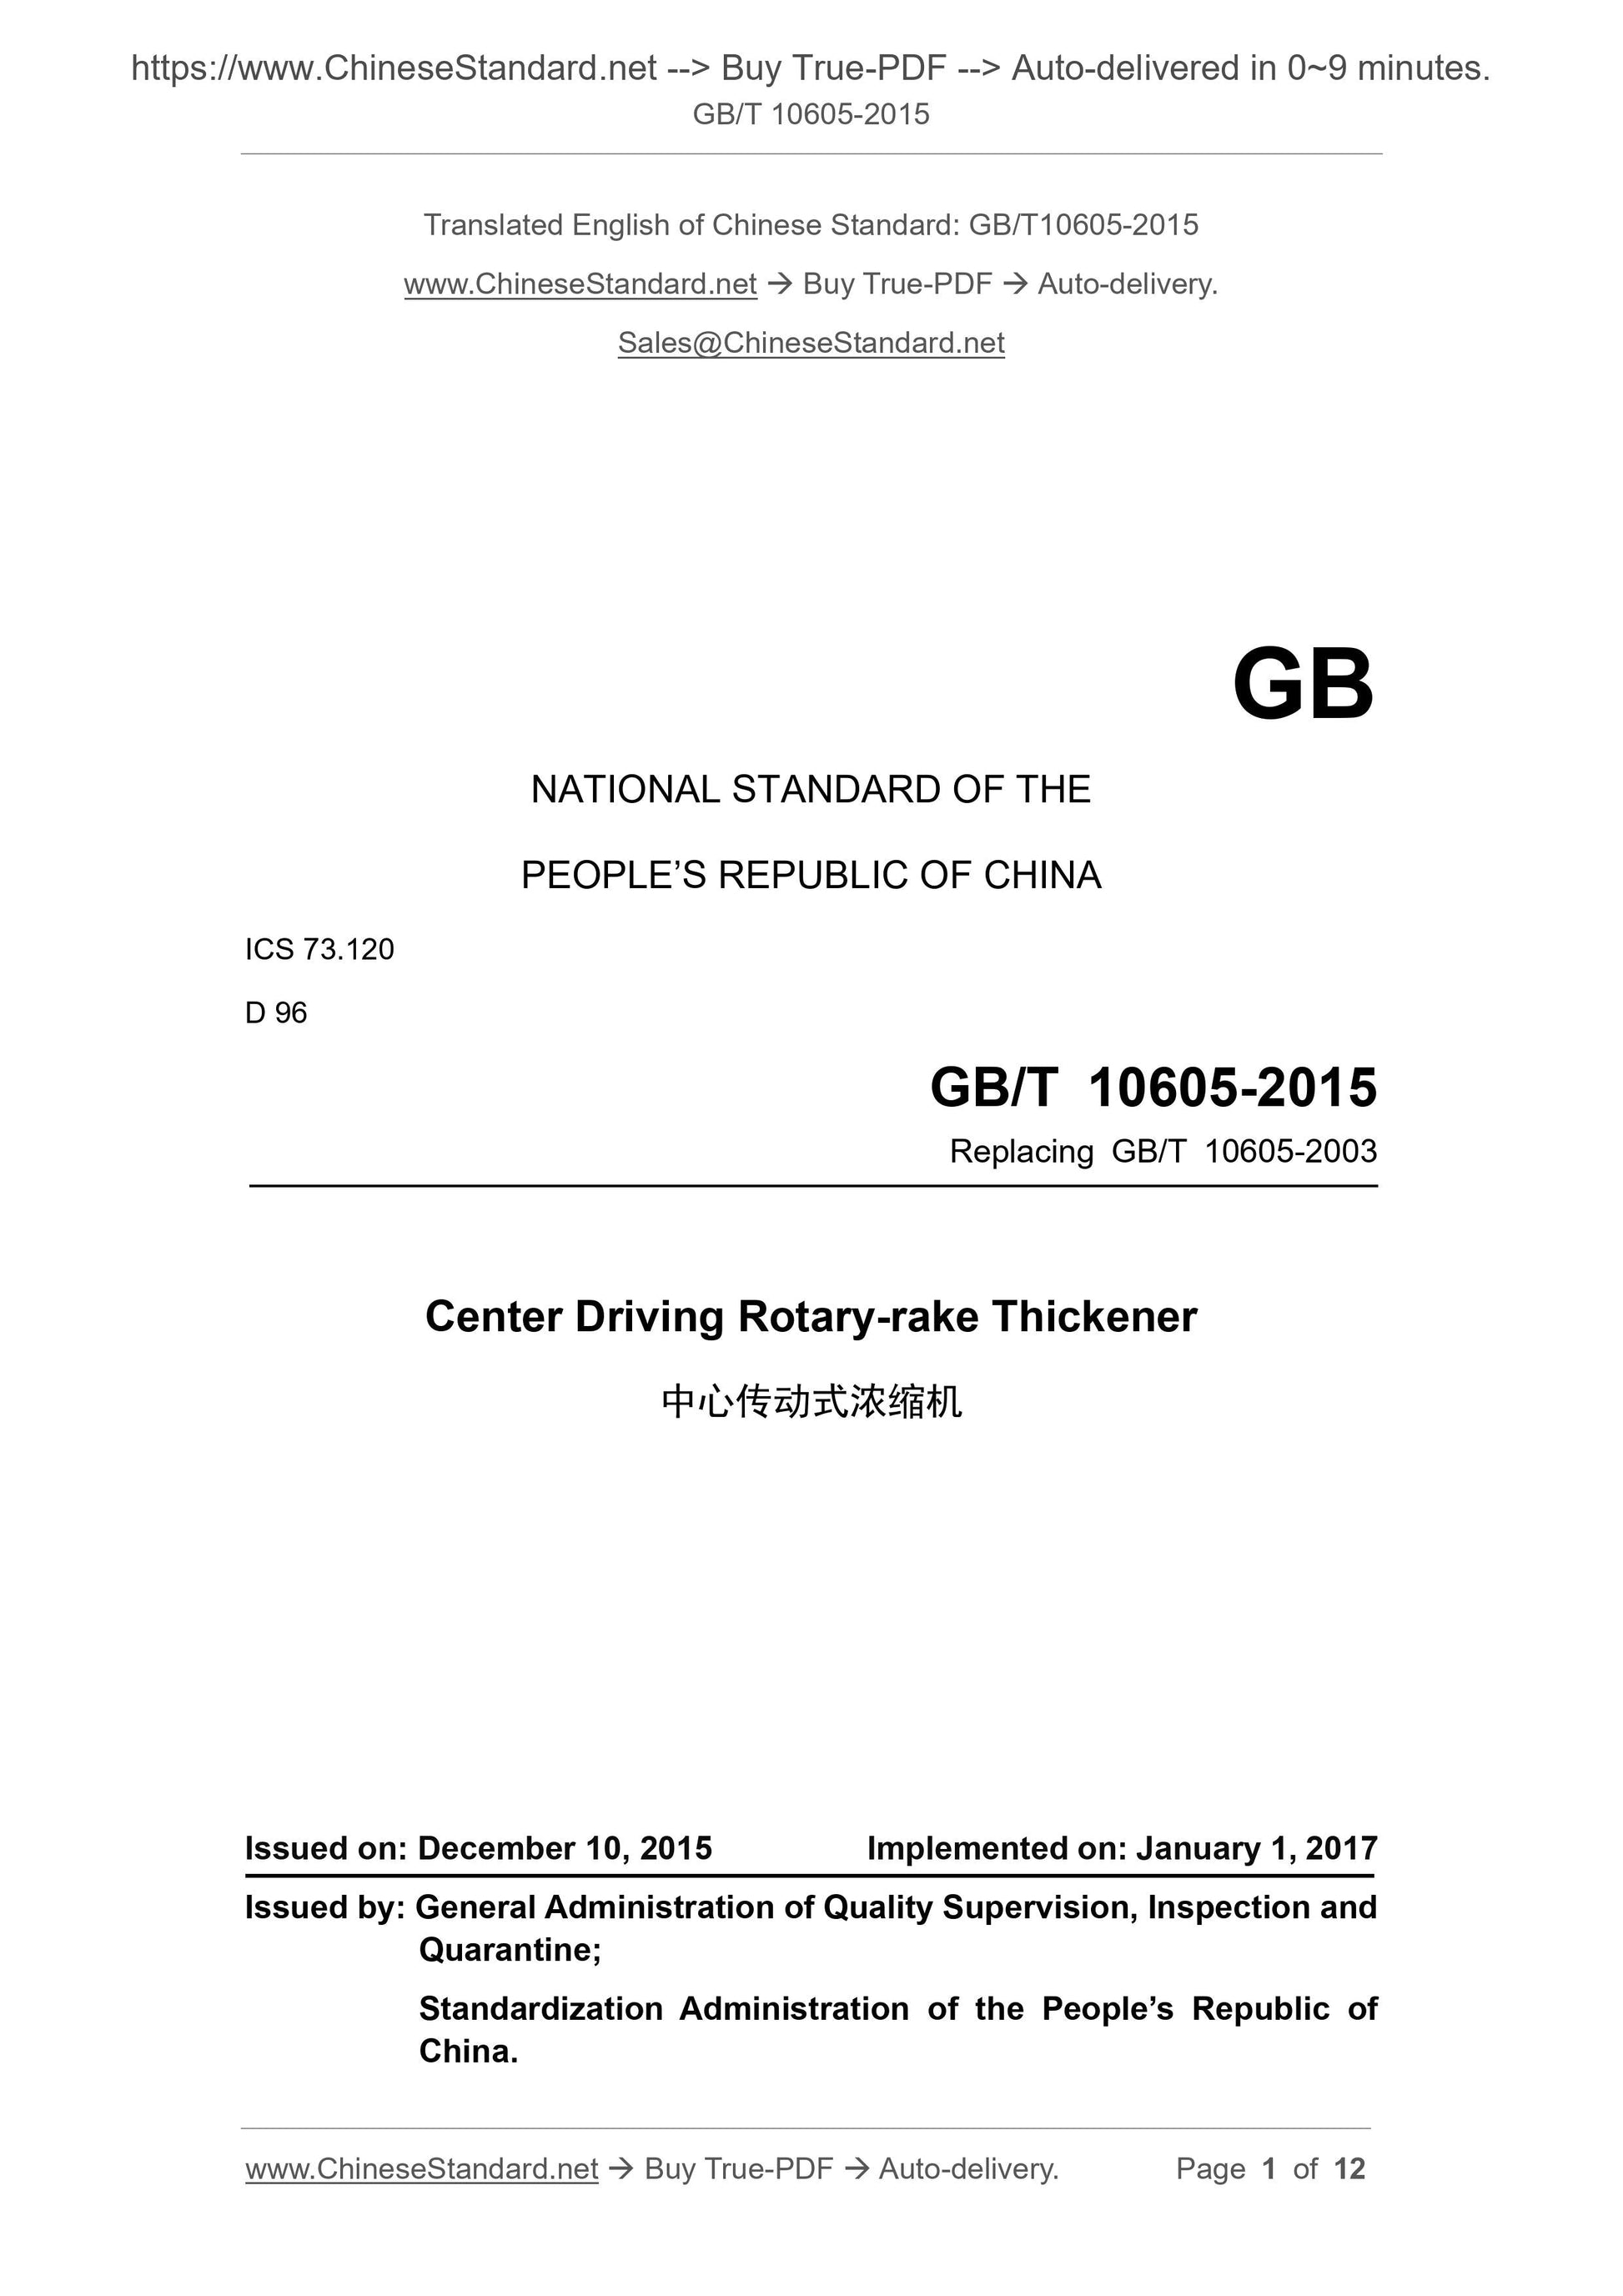 GB/T 10605-2015 Page 1